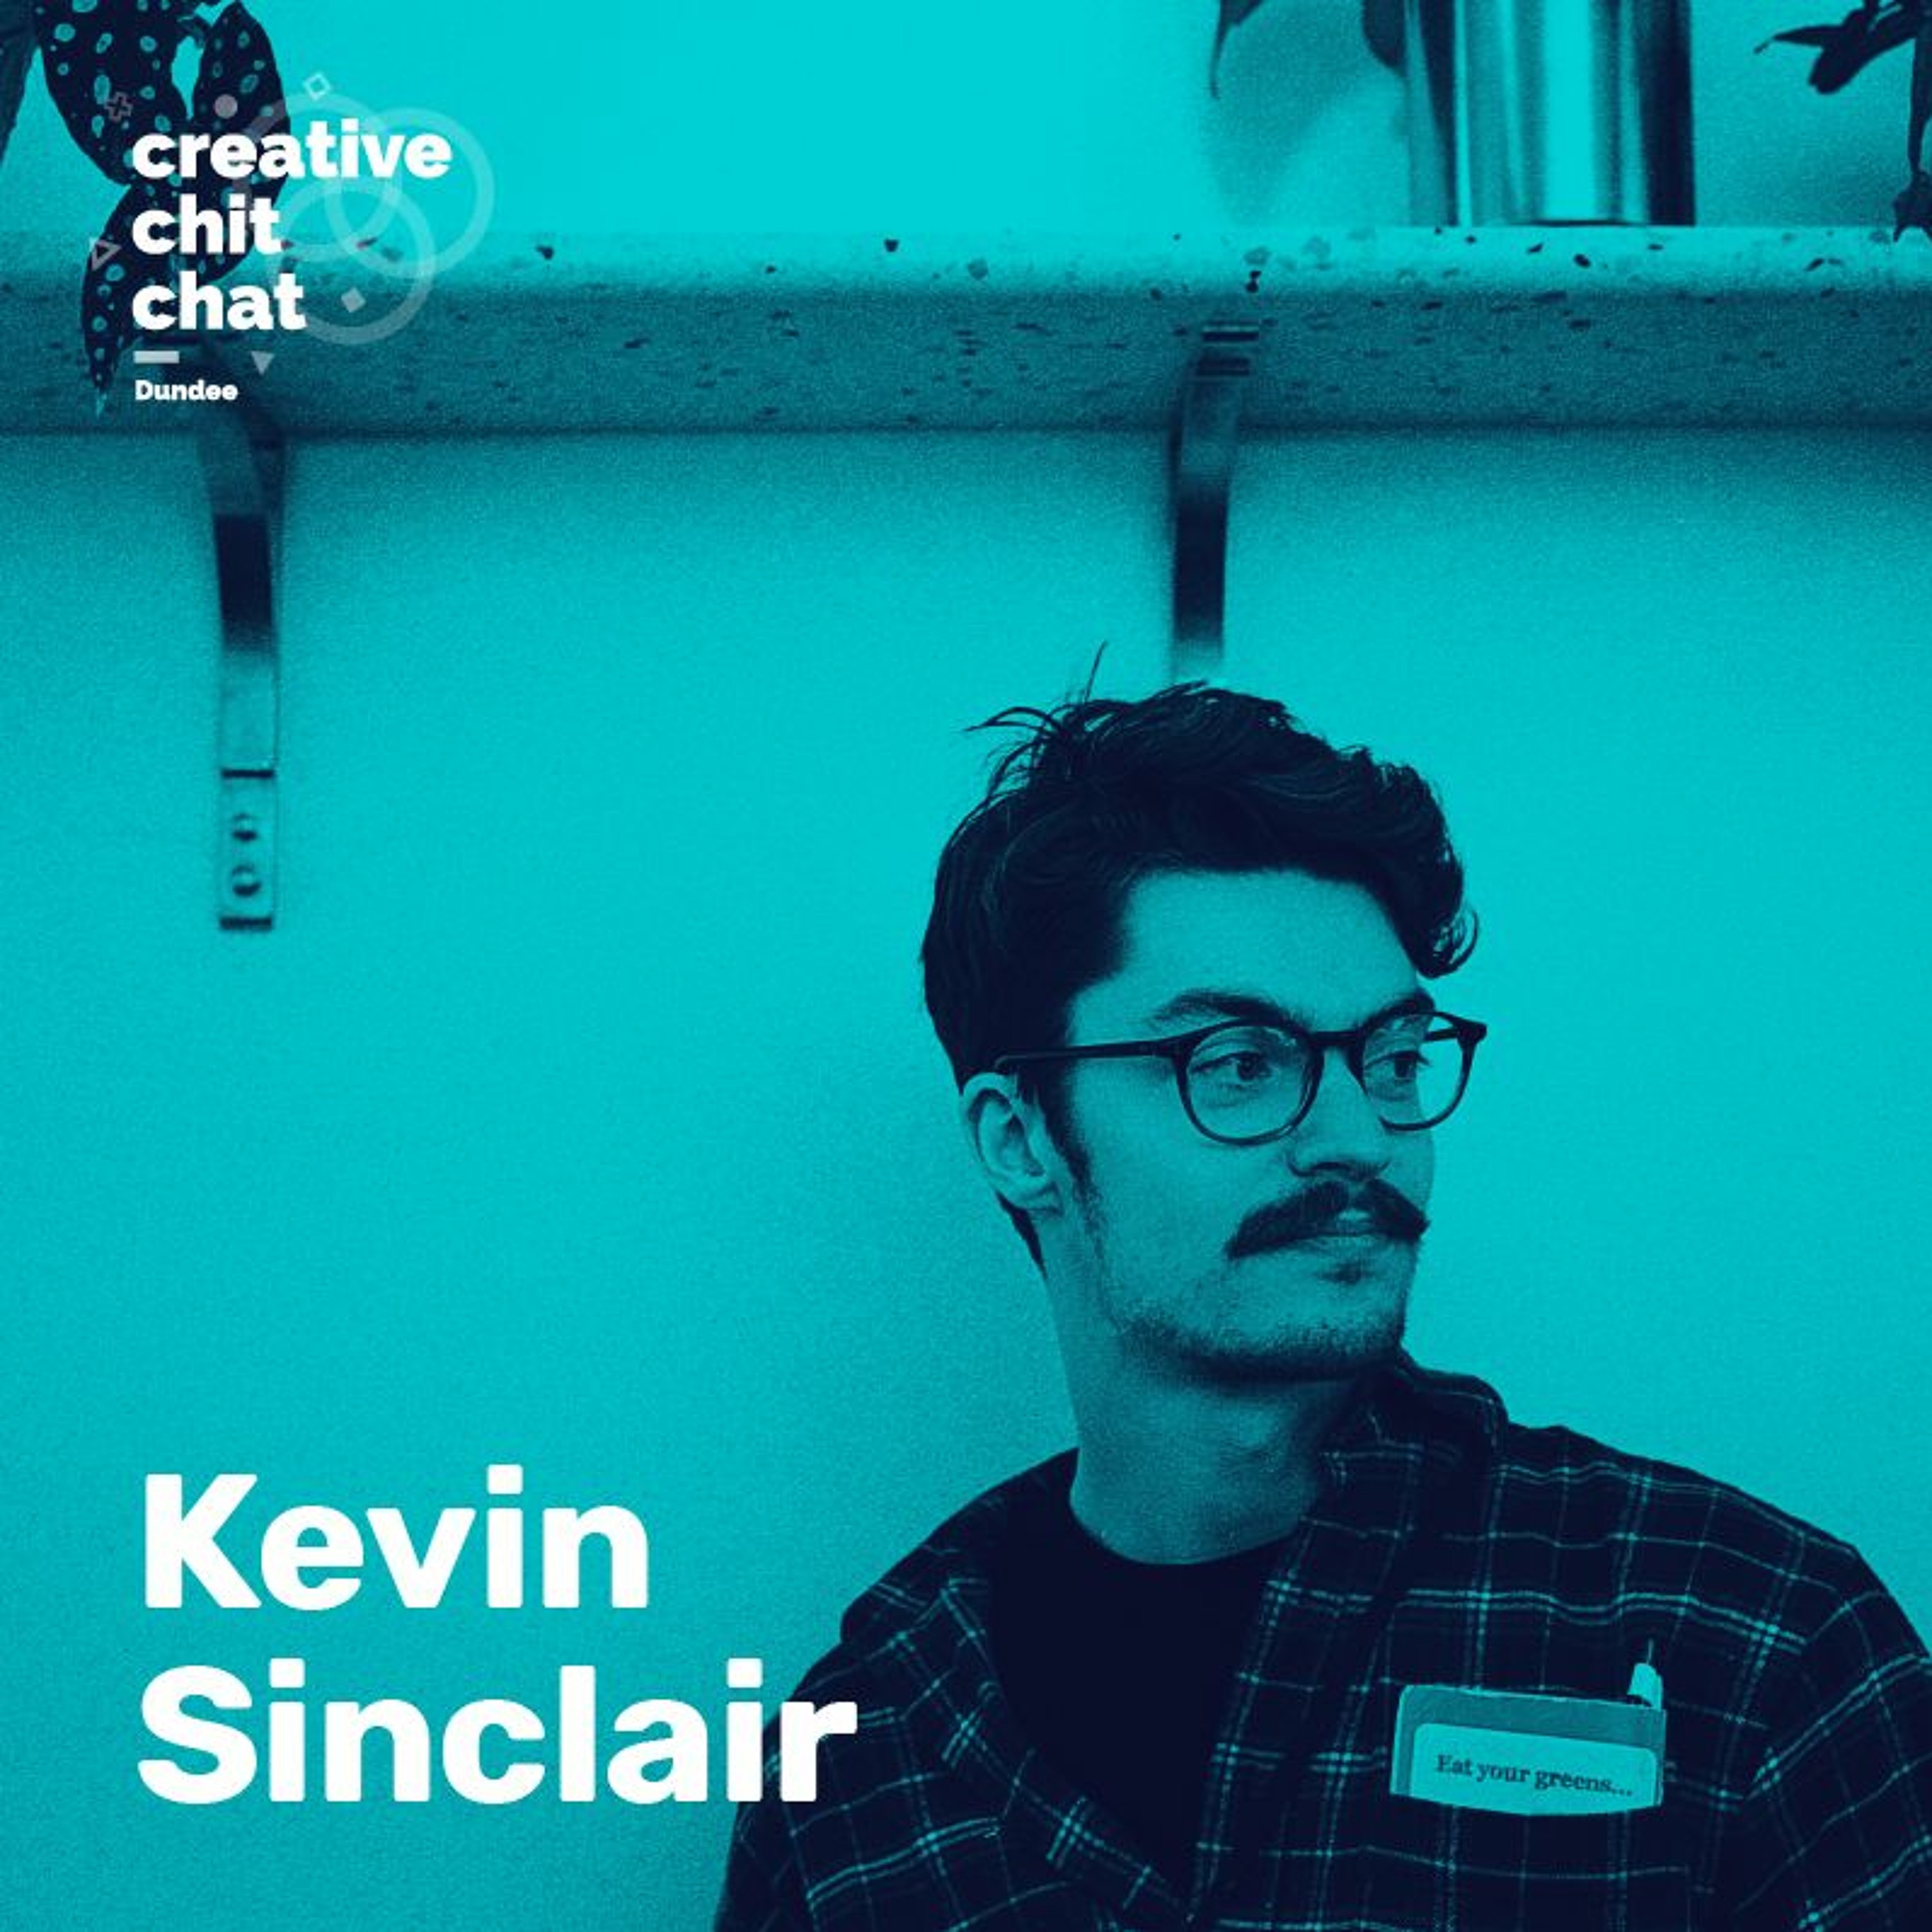 Kevin Sinclair - Product design, retaining talent and championing small scale creative practice